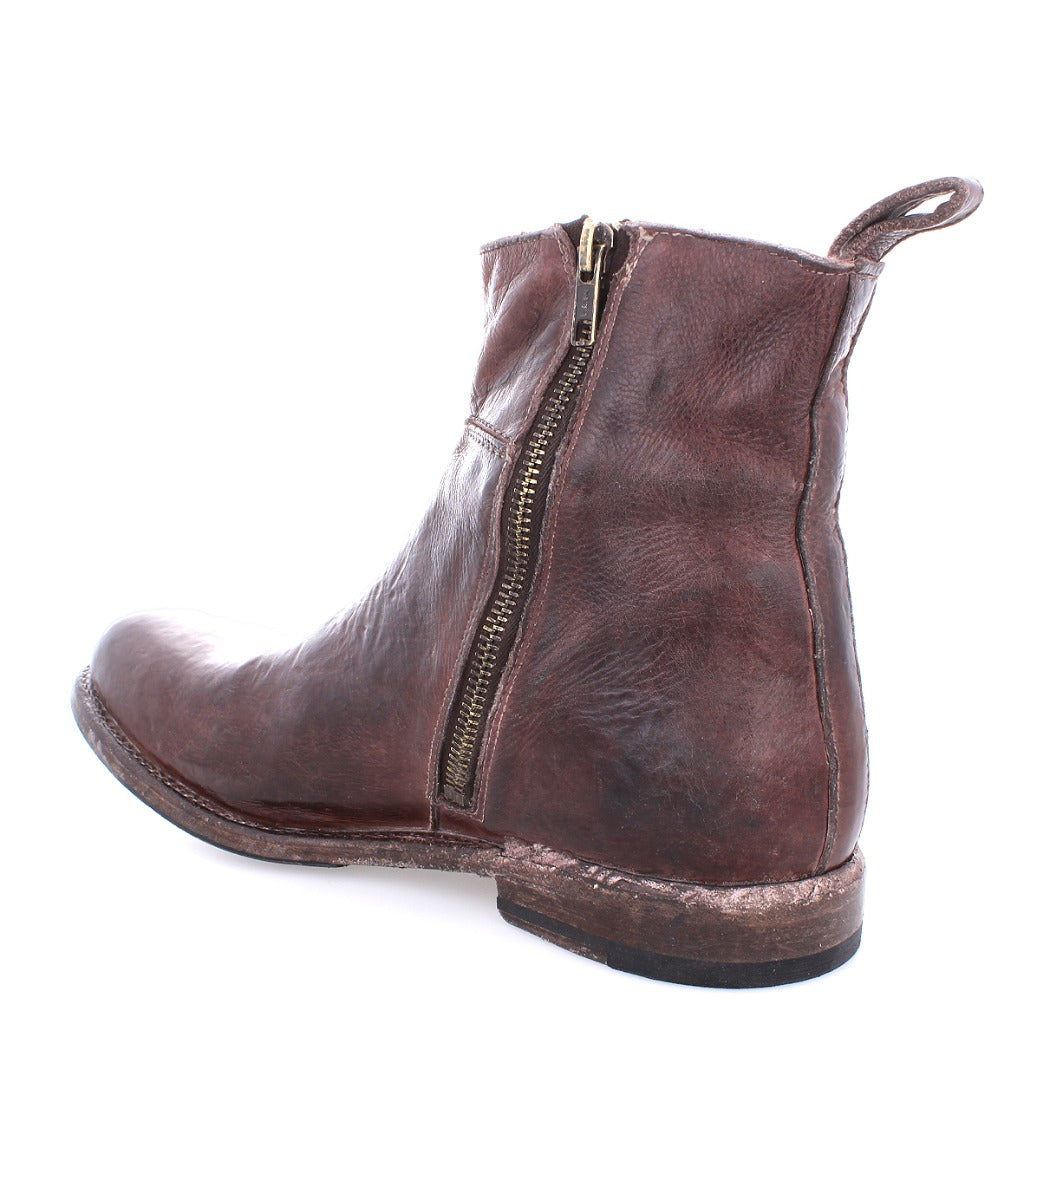 A brown leather Bed Stu Kaldi ankle boot with a zipper on the side.